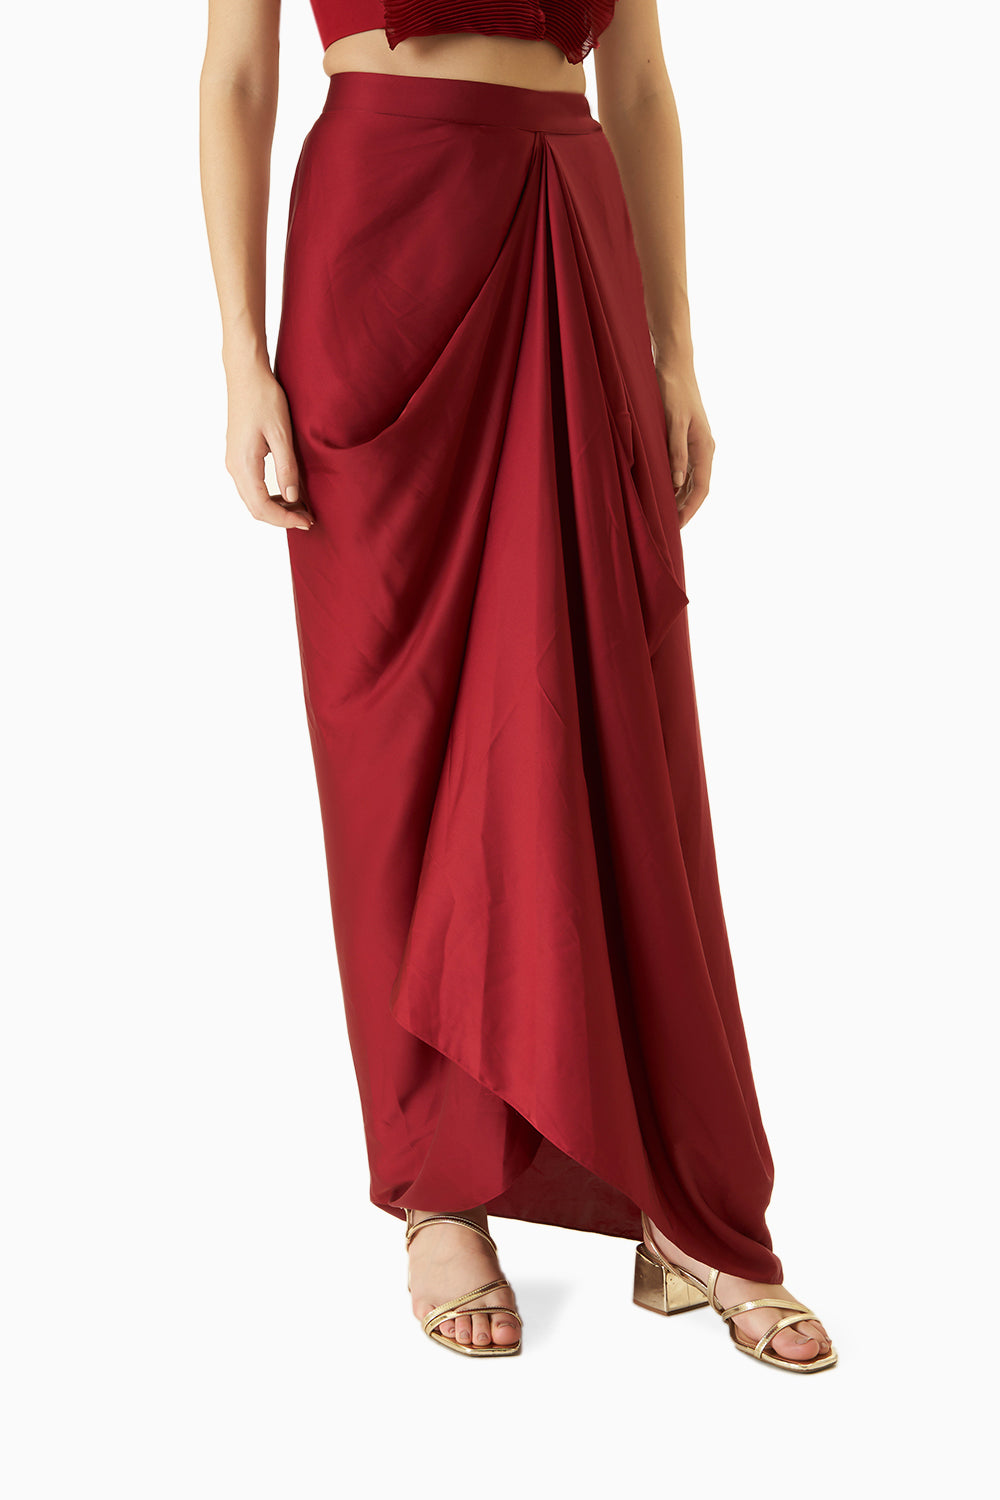 Red Draped Style Skirt